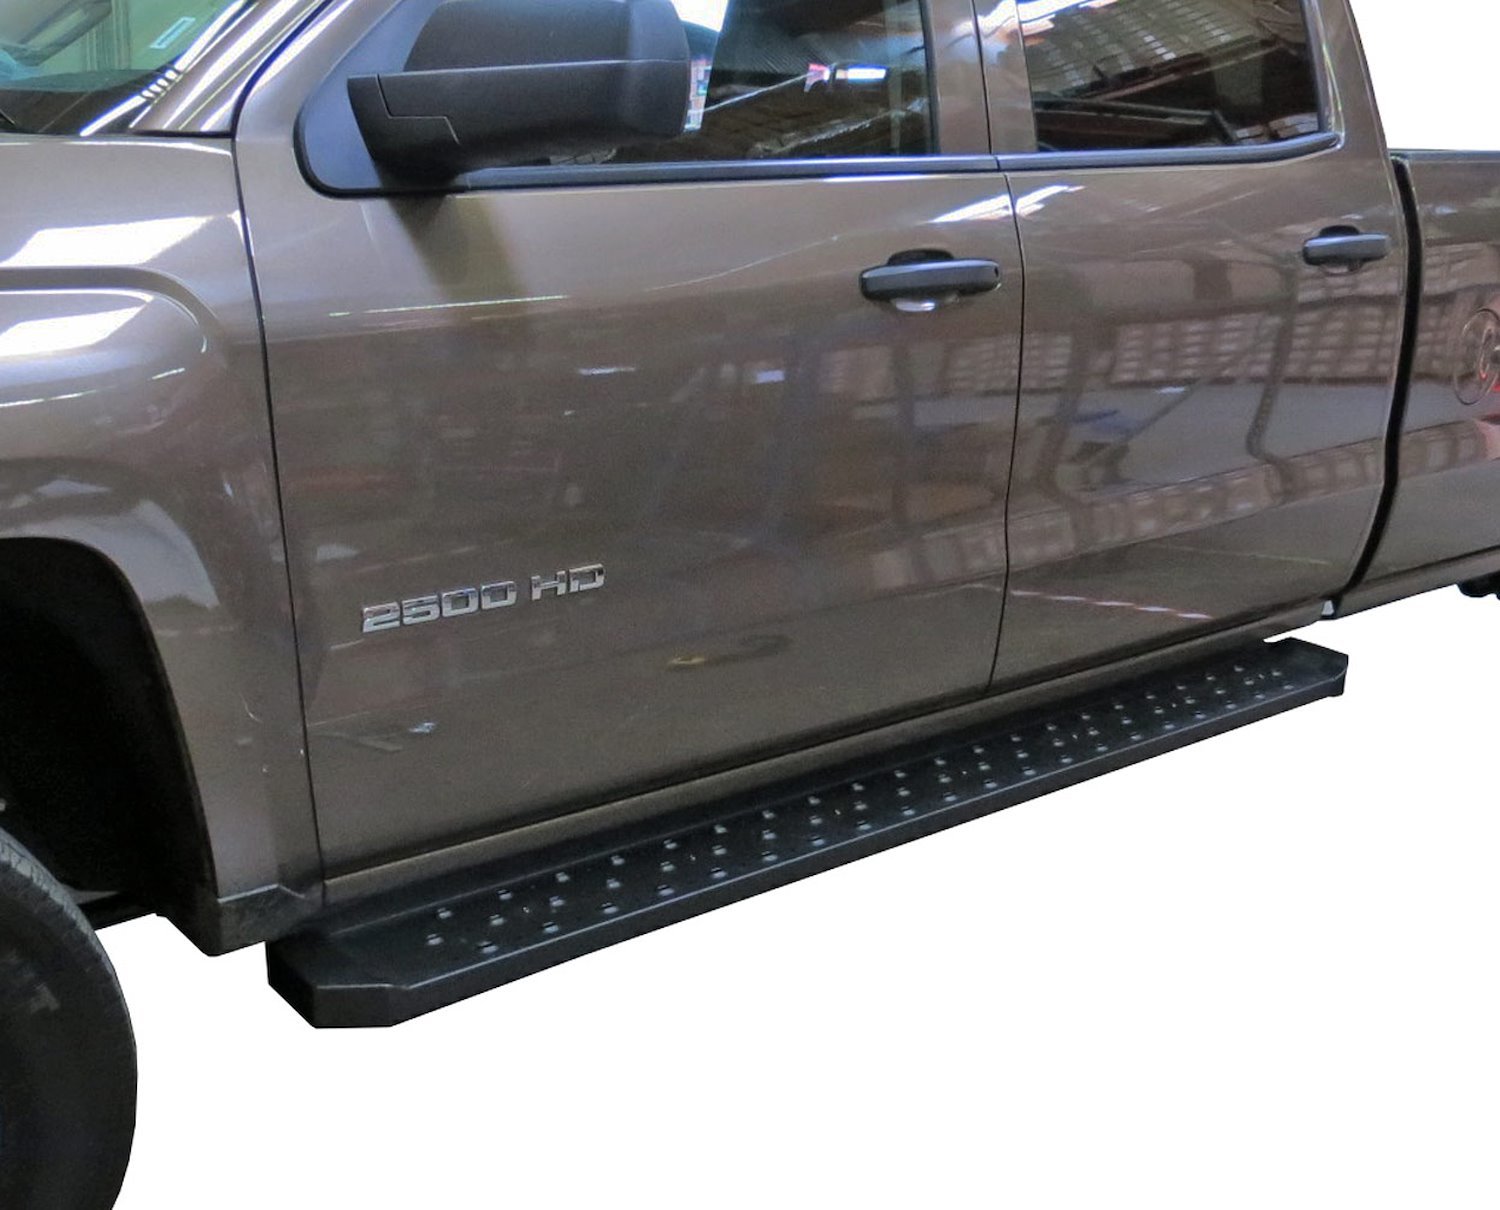 STX 600 utility boards were designed with a maximum durable style finish for the working truck and v